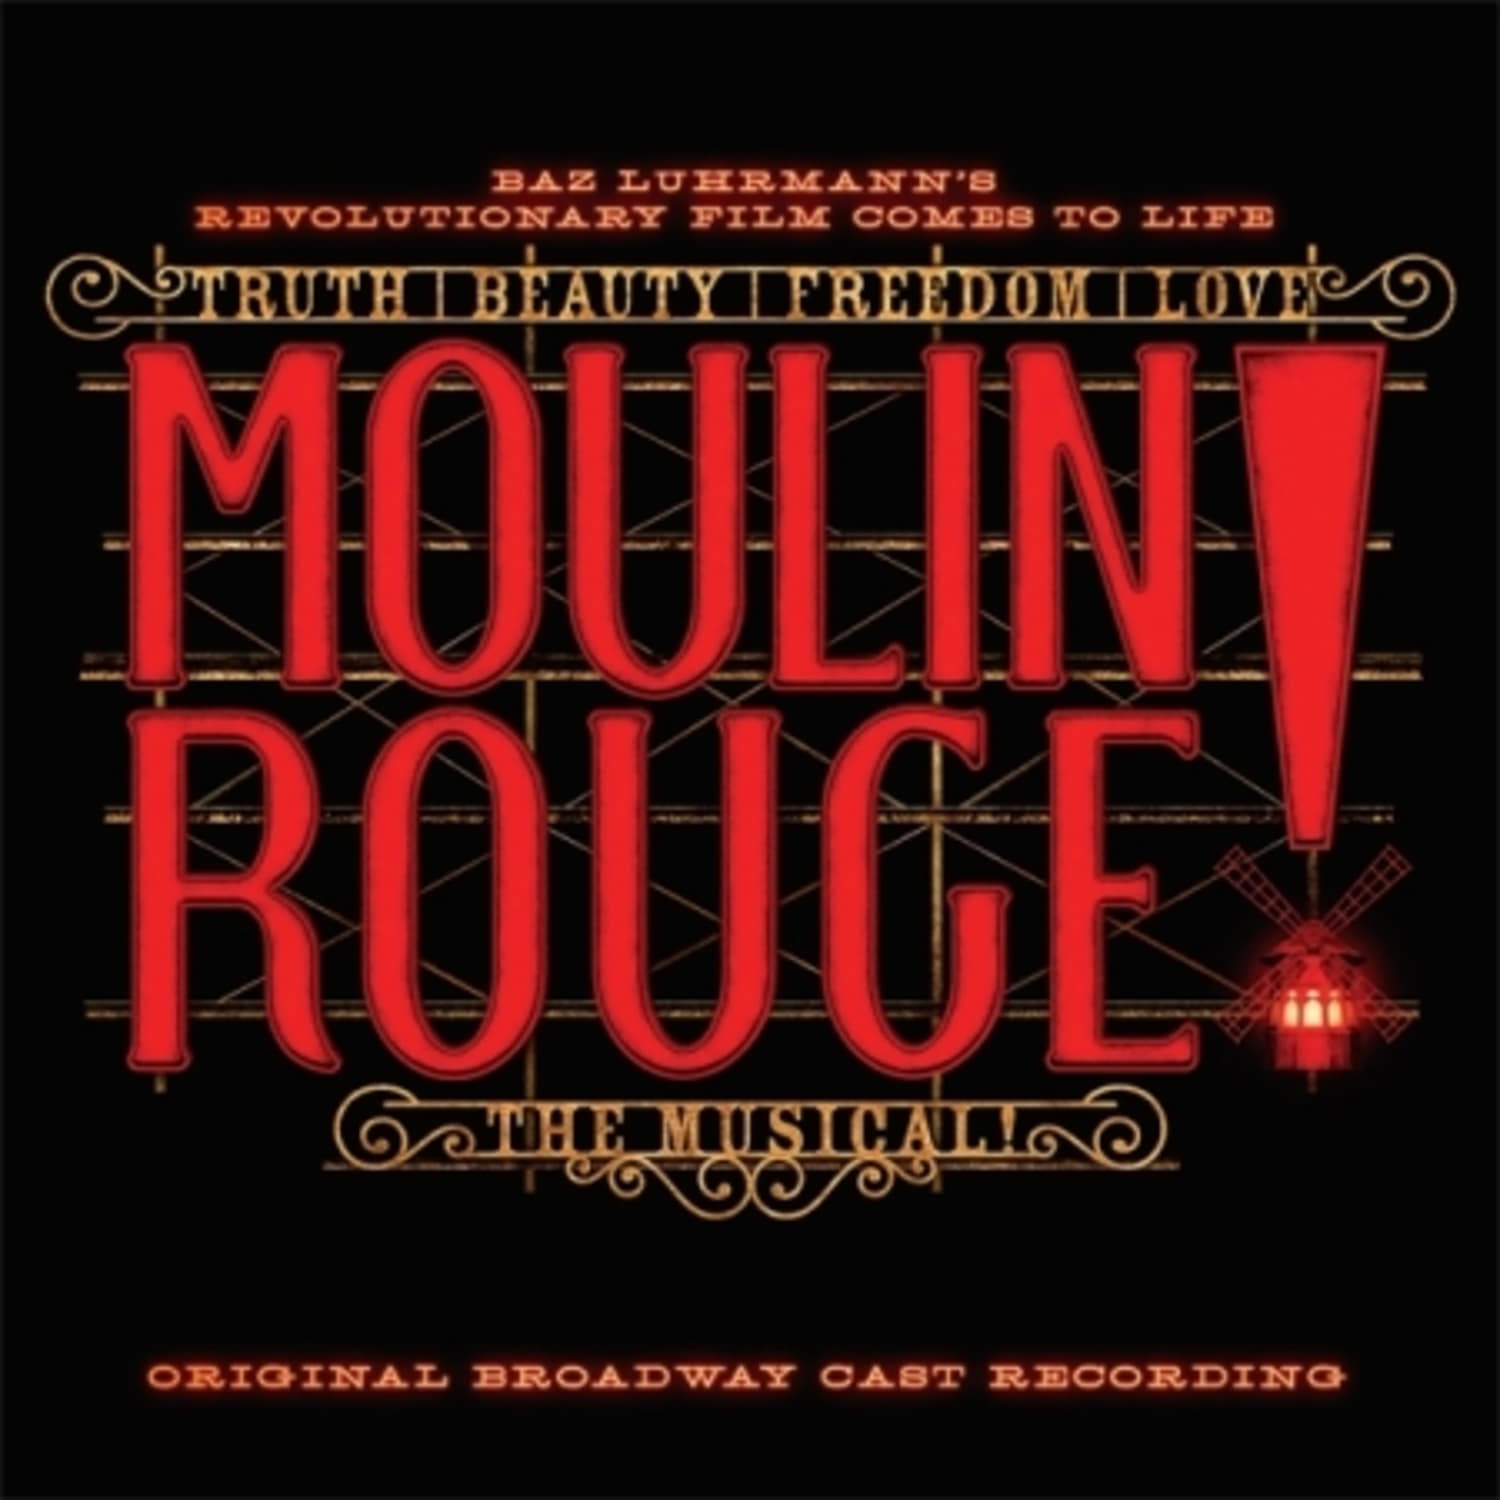 MOULIN ROUGE! THE MUSICAL - ORIGINAL BROADWAY CAST RECORDING